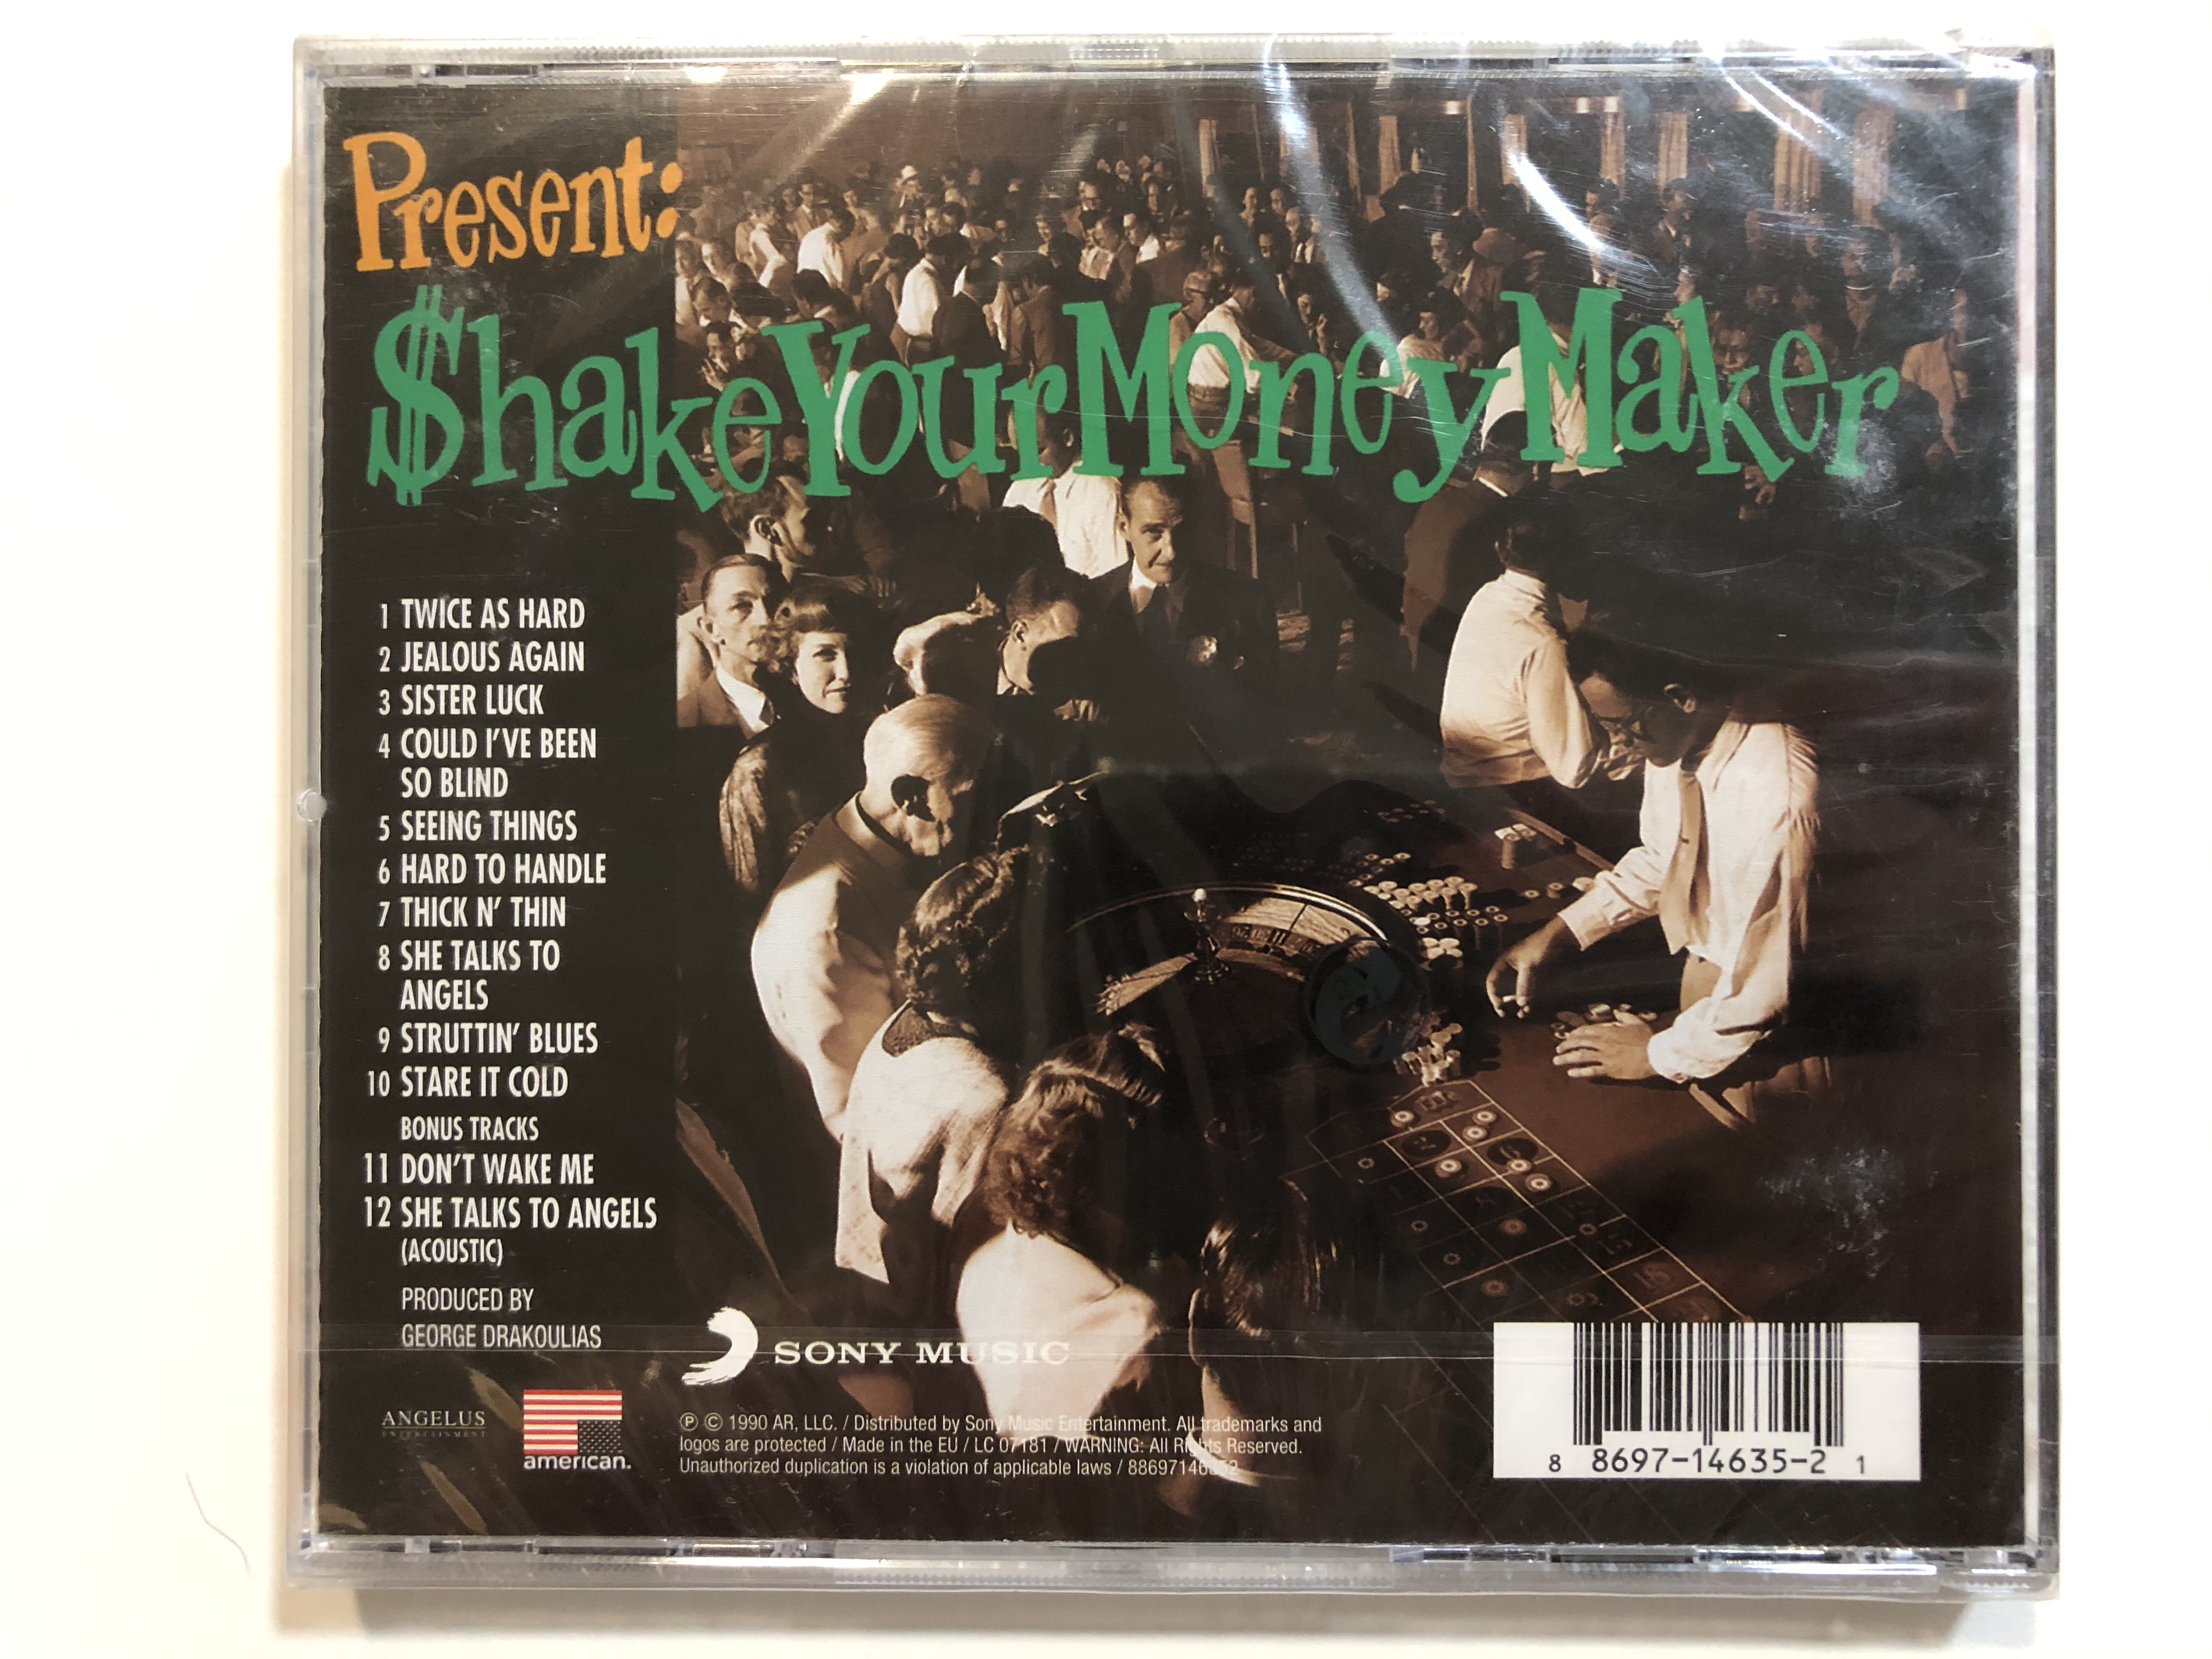 the-black-crowes-shake-your-money-maker-digitally-remastered-features-twice-as-hard-jealous-again-hard-to-handle-she-talks-to-angels.-plus-bonus-tracks-american-recordings-audio-cd-.jpg